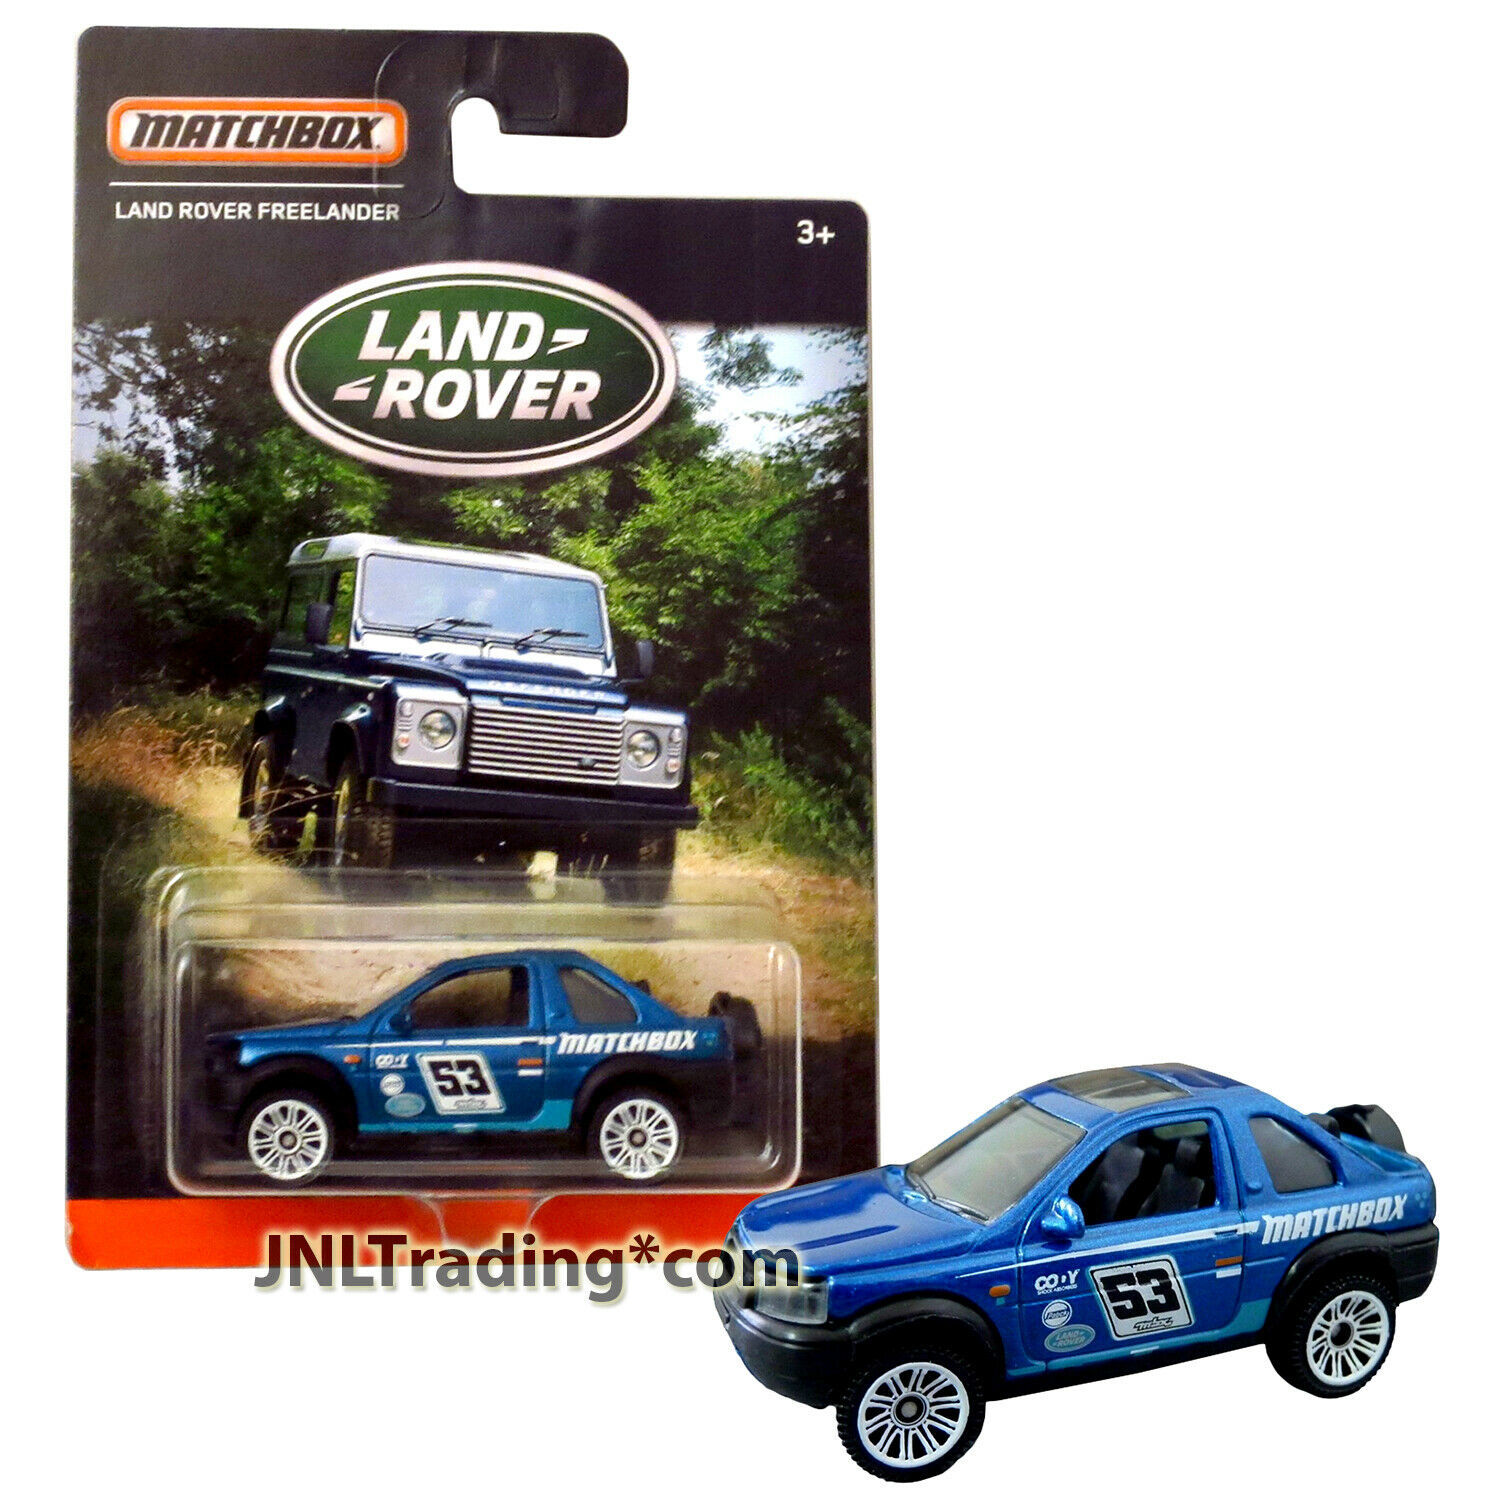 Primary image for Year 2016 Matchbox Land Rover 1:64 Die Cast Car - Blue SUV LAND ROVER FREELANDER